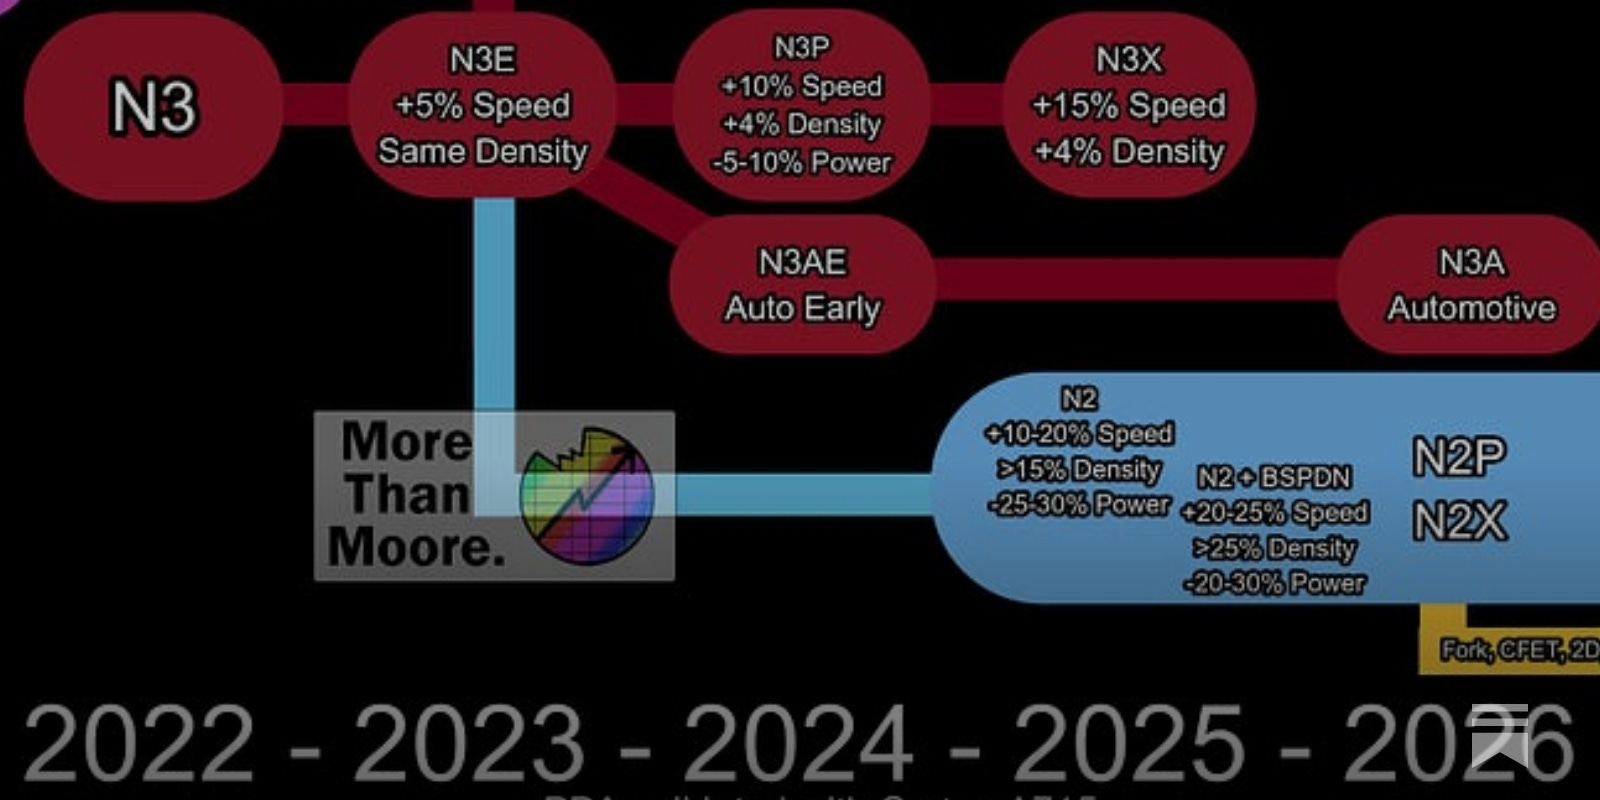 𝐷𝑟. 𝐼𝑎𝑛 𝐶𝑢𝑡𝑟𝑒𝑠𝑠 on X: Here's a mockup of what was shown  regarding TSMC's N4 D0 defect rate compared to previous nodes. Grey line  shows high volume manufacturing start (N4 beyond HVM